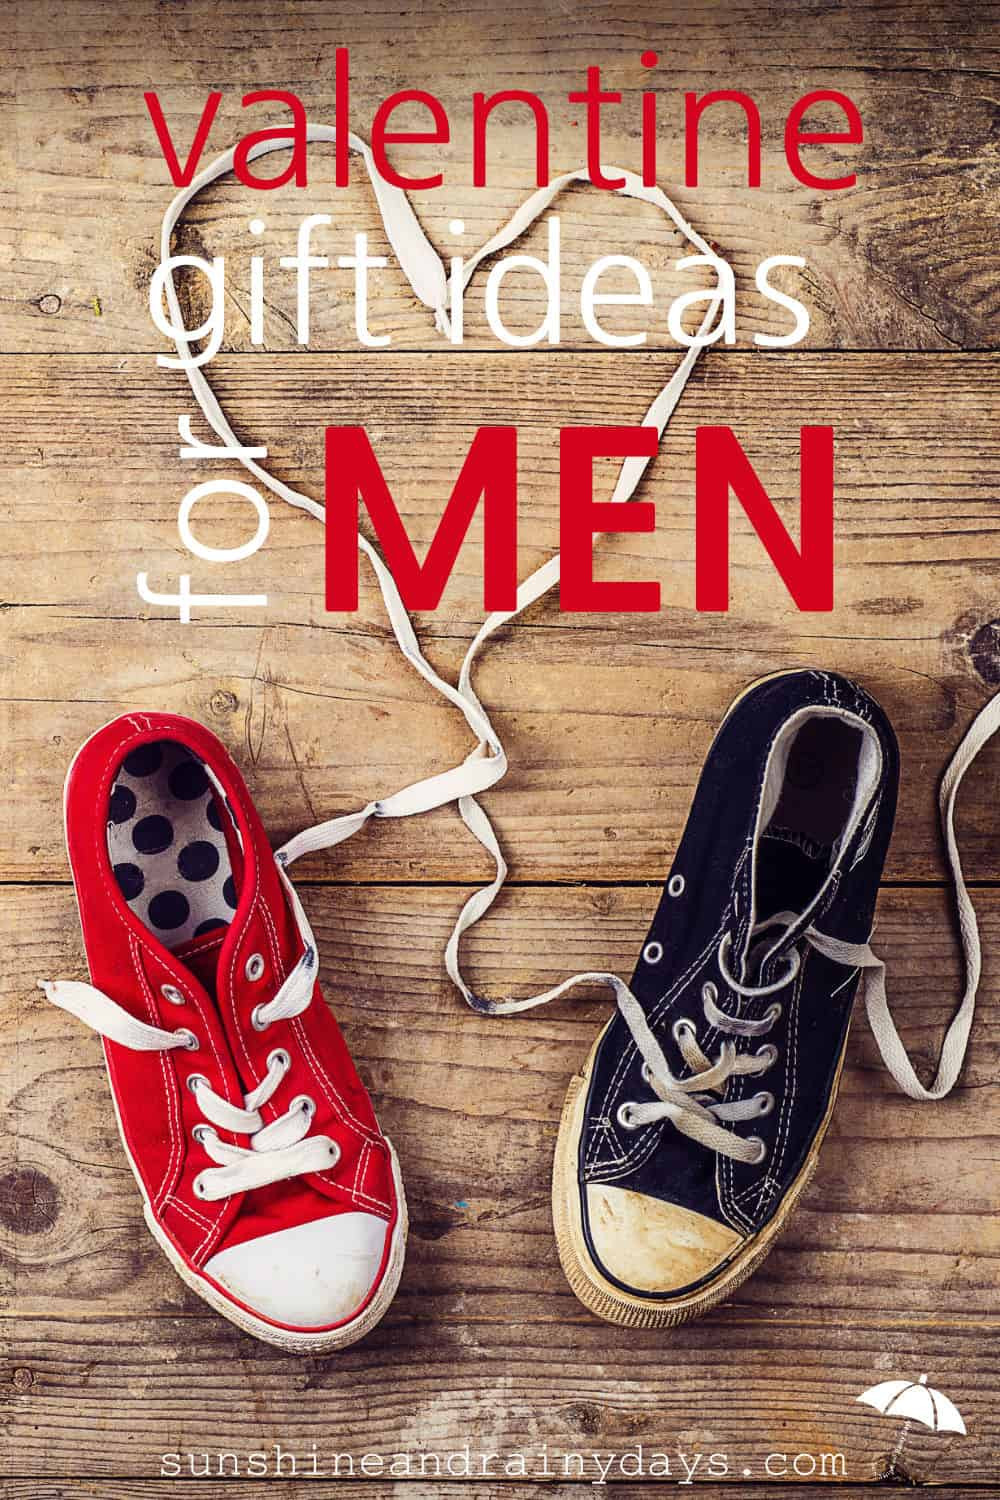 Ideas For Guys Valentines Gift
 Valentine Gift Ideas For Men Sunshine and Rainy Days